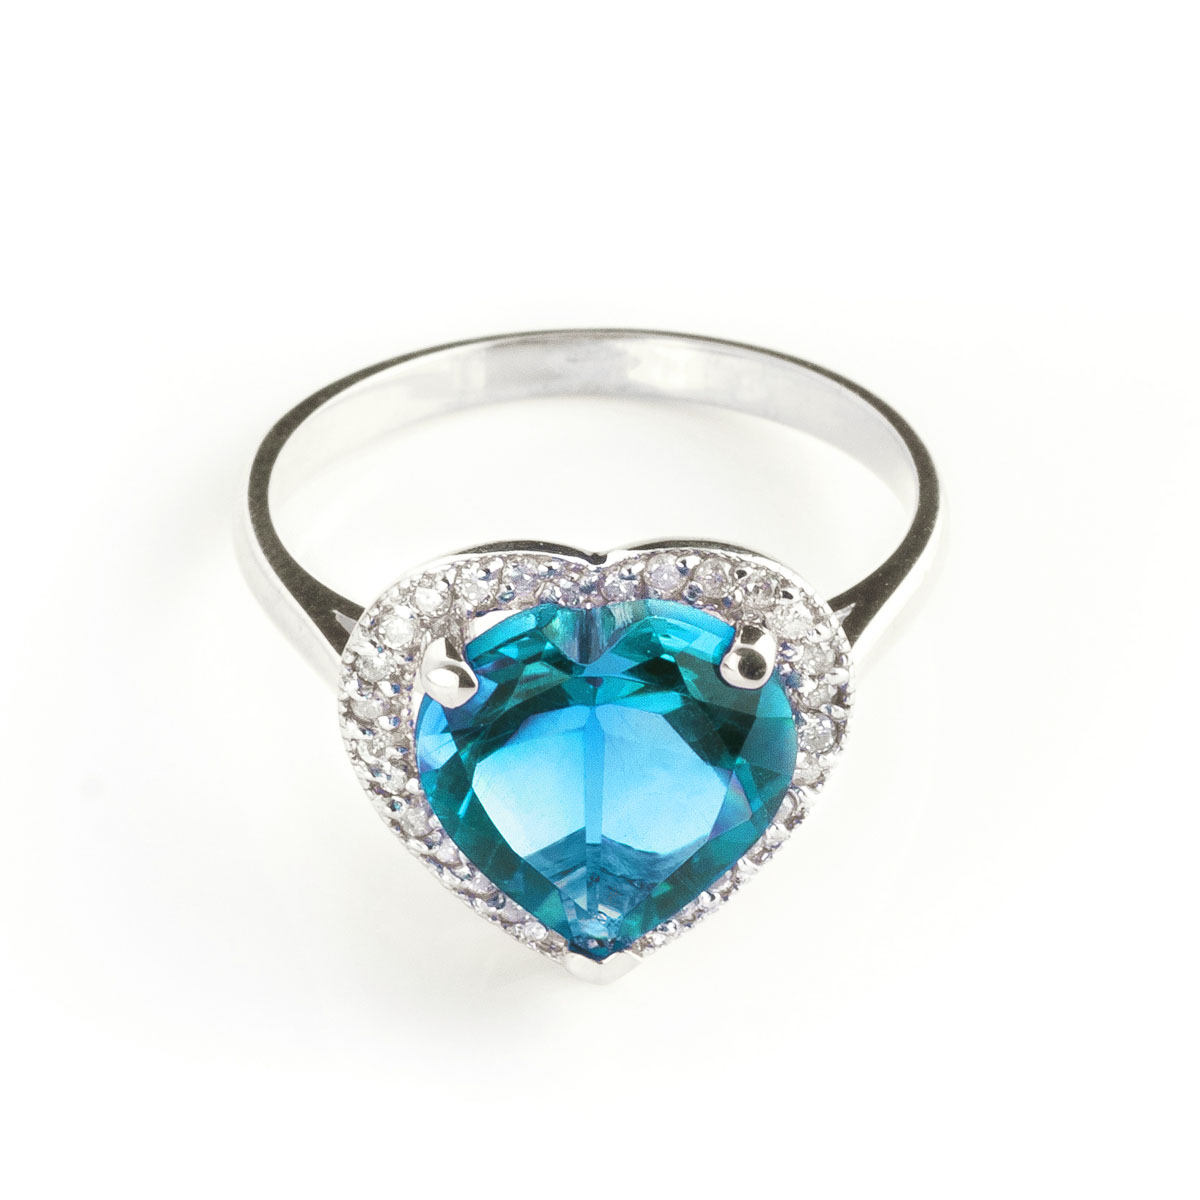 Blue Topaz Halo Ring 6.44 ctw in 18ct White Gold